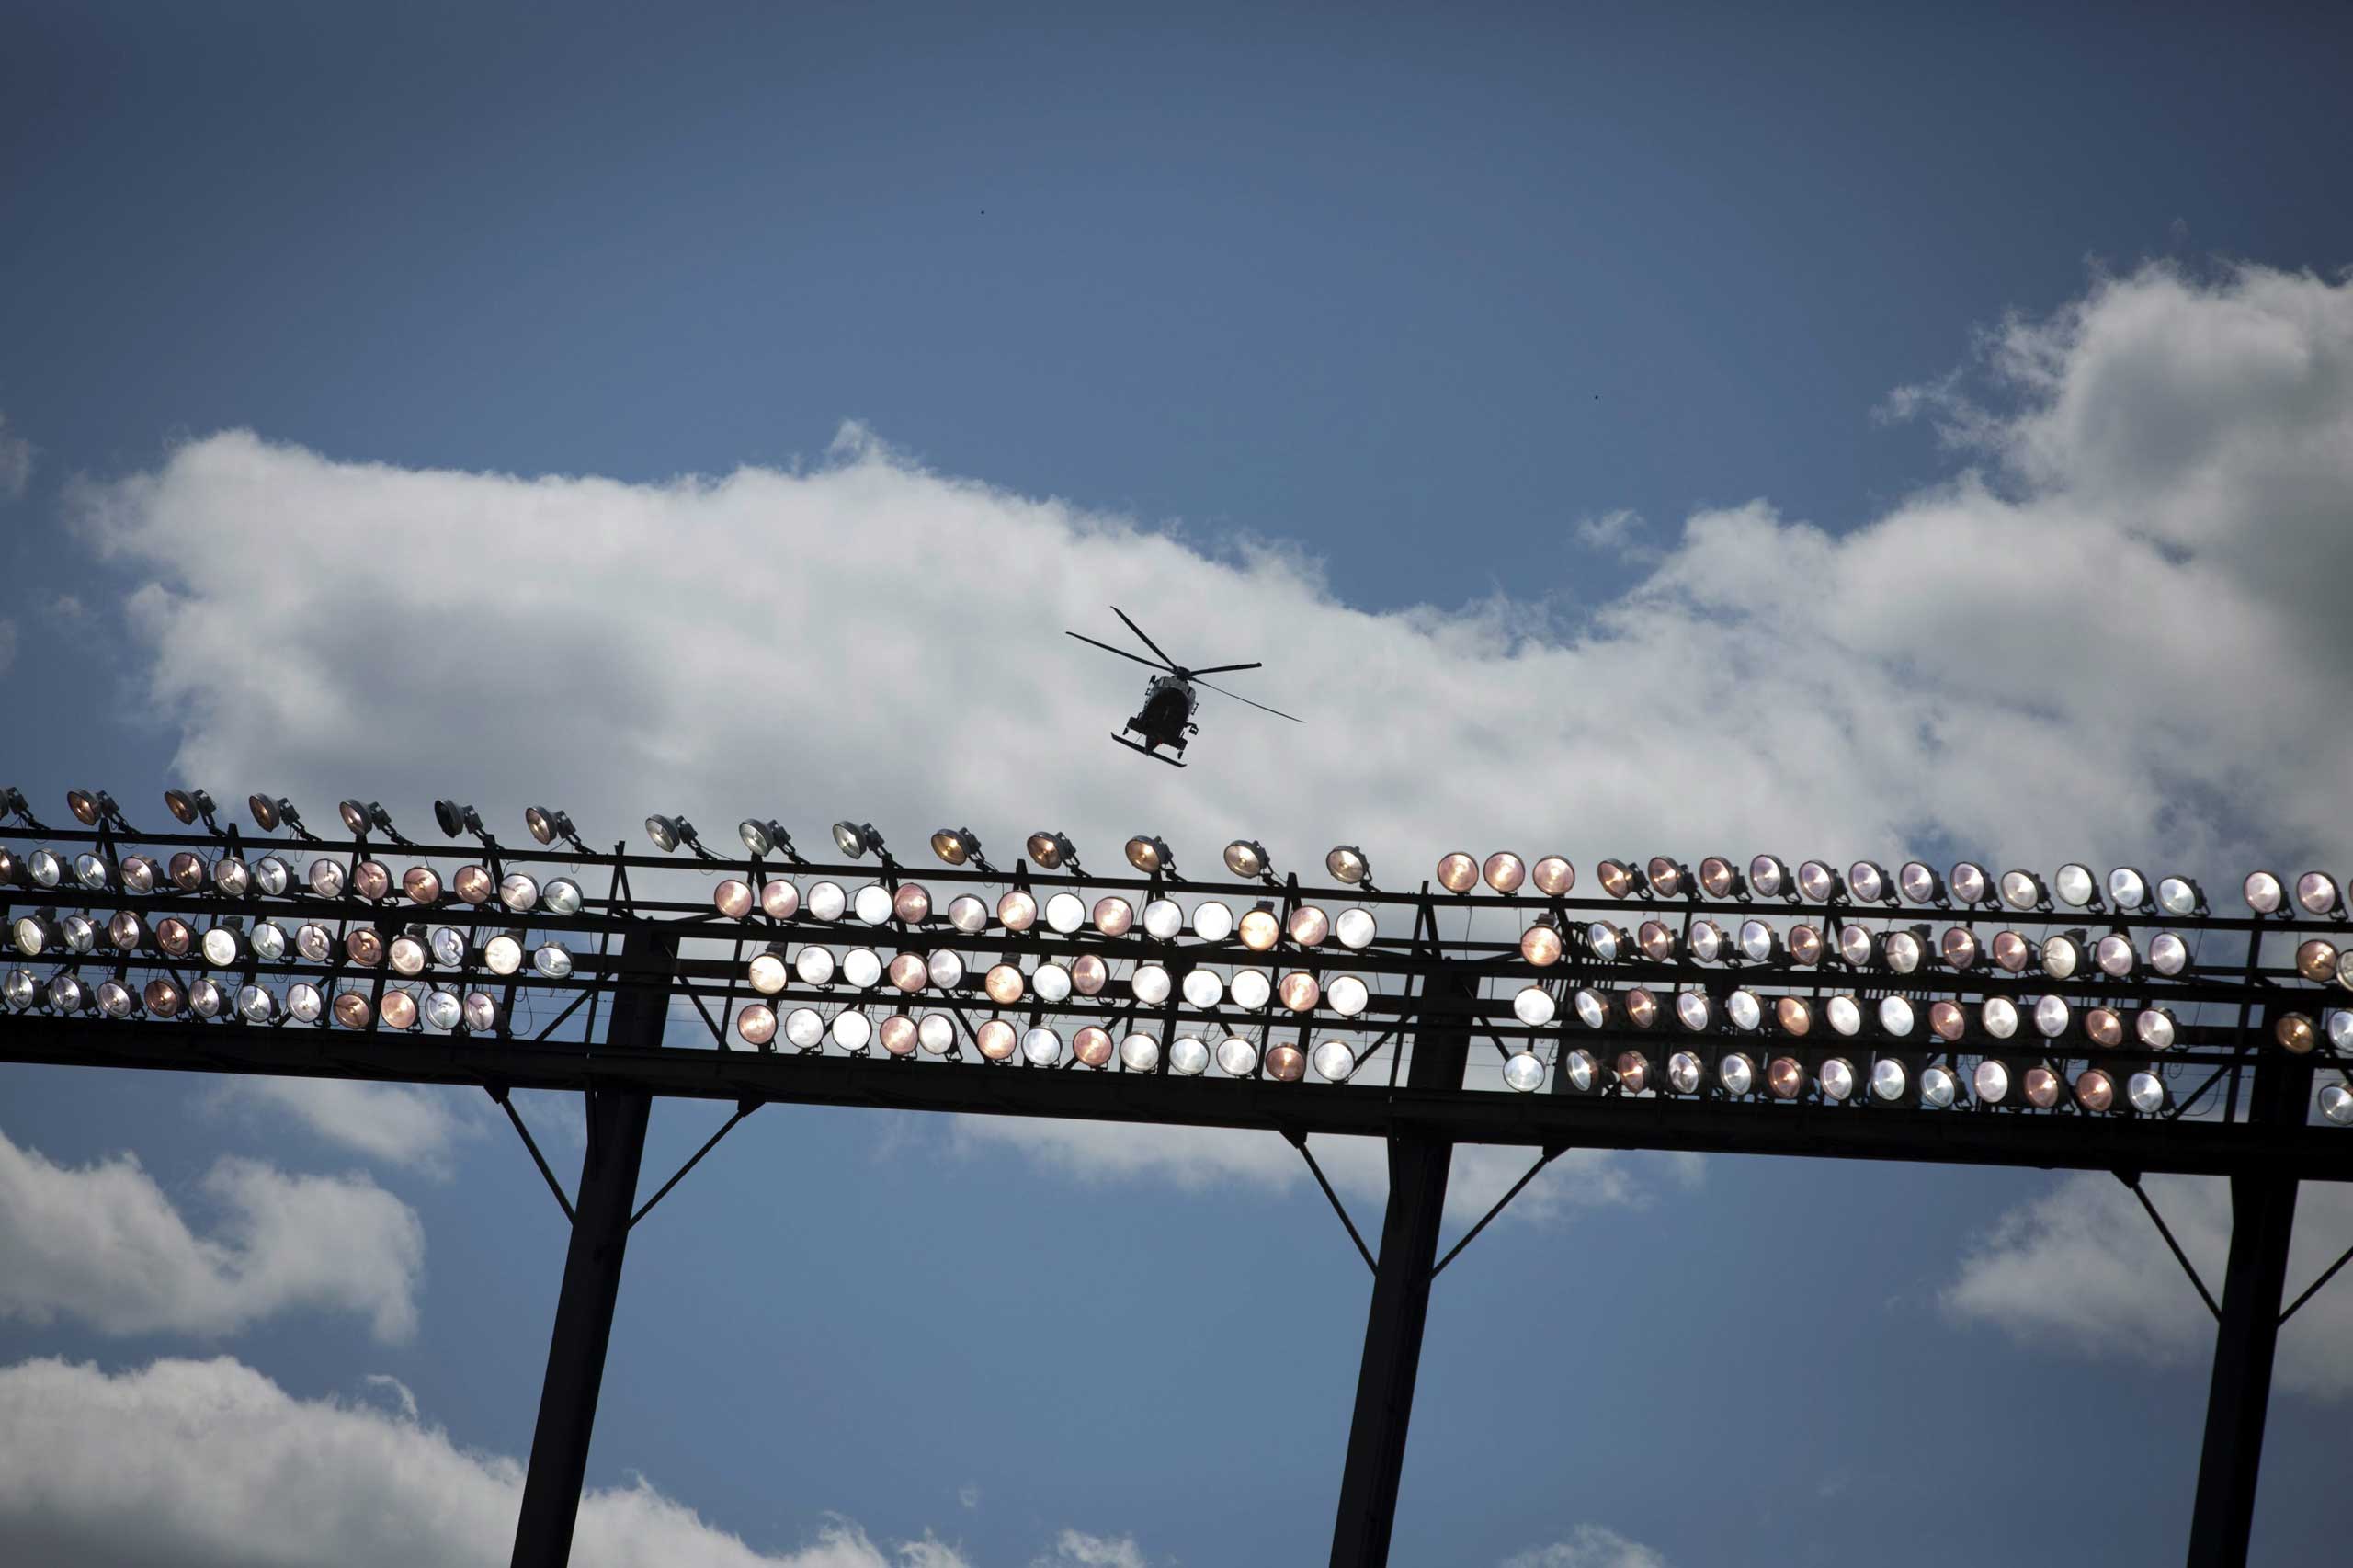 A Maryland State Trooper helicopter flies over Oriole Park at Camden Yards in Baltimore on April 29, 2015.